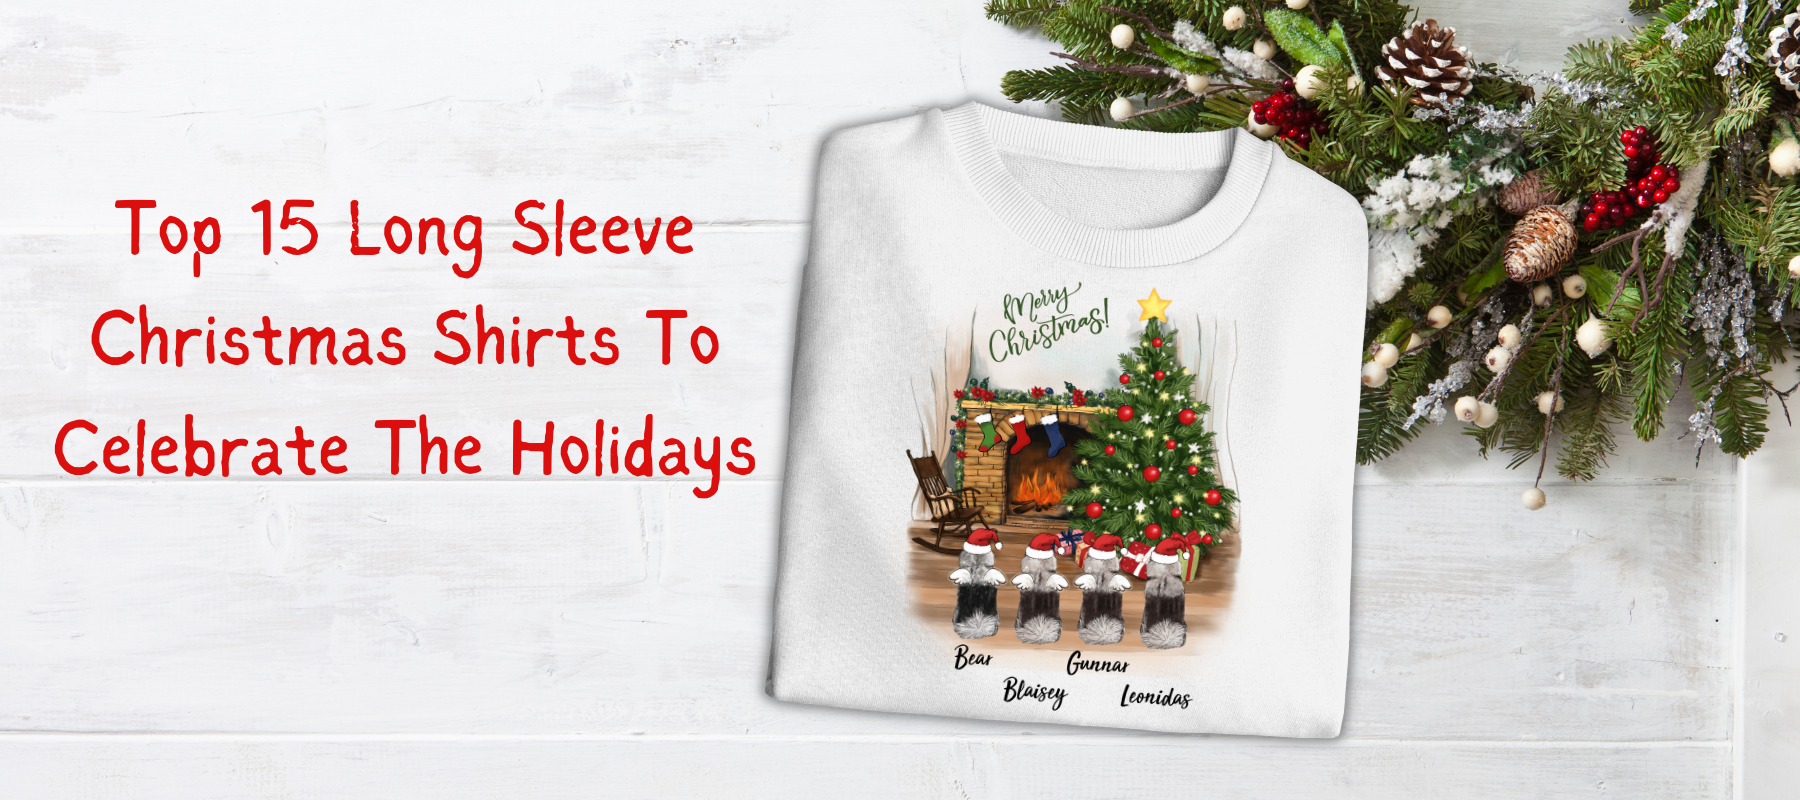 Top 15 Long Sleeve Christmas Shirts To Celebrate The Holidays